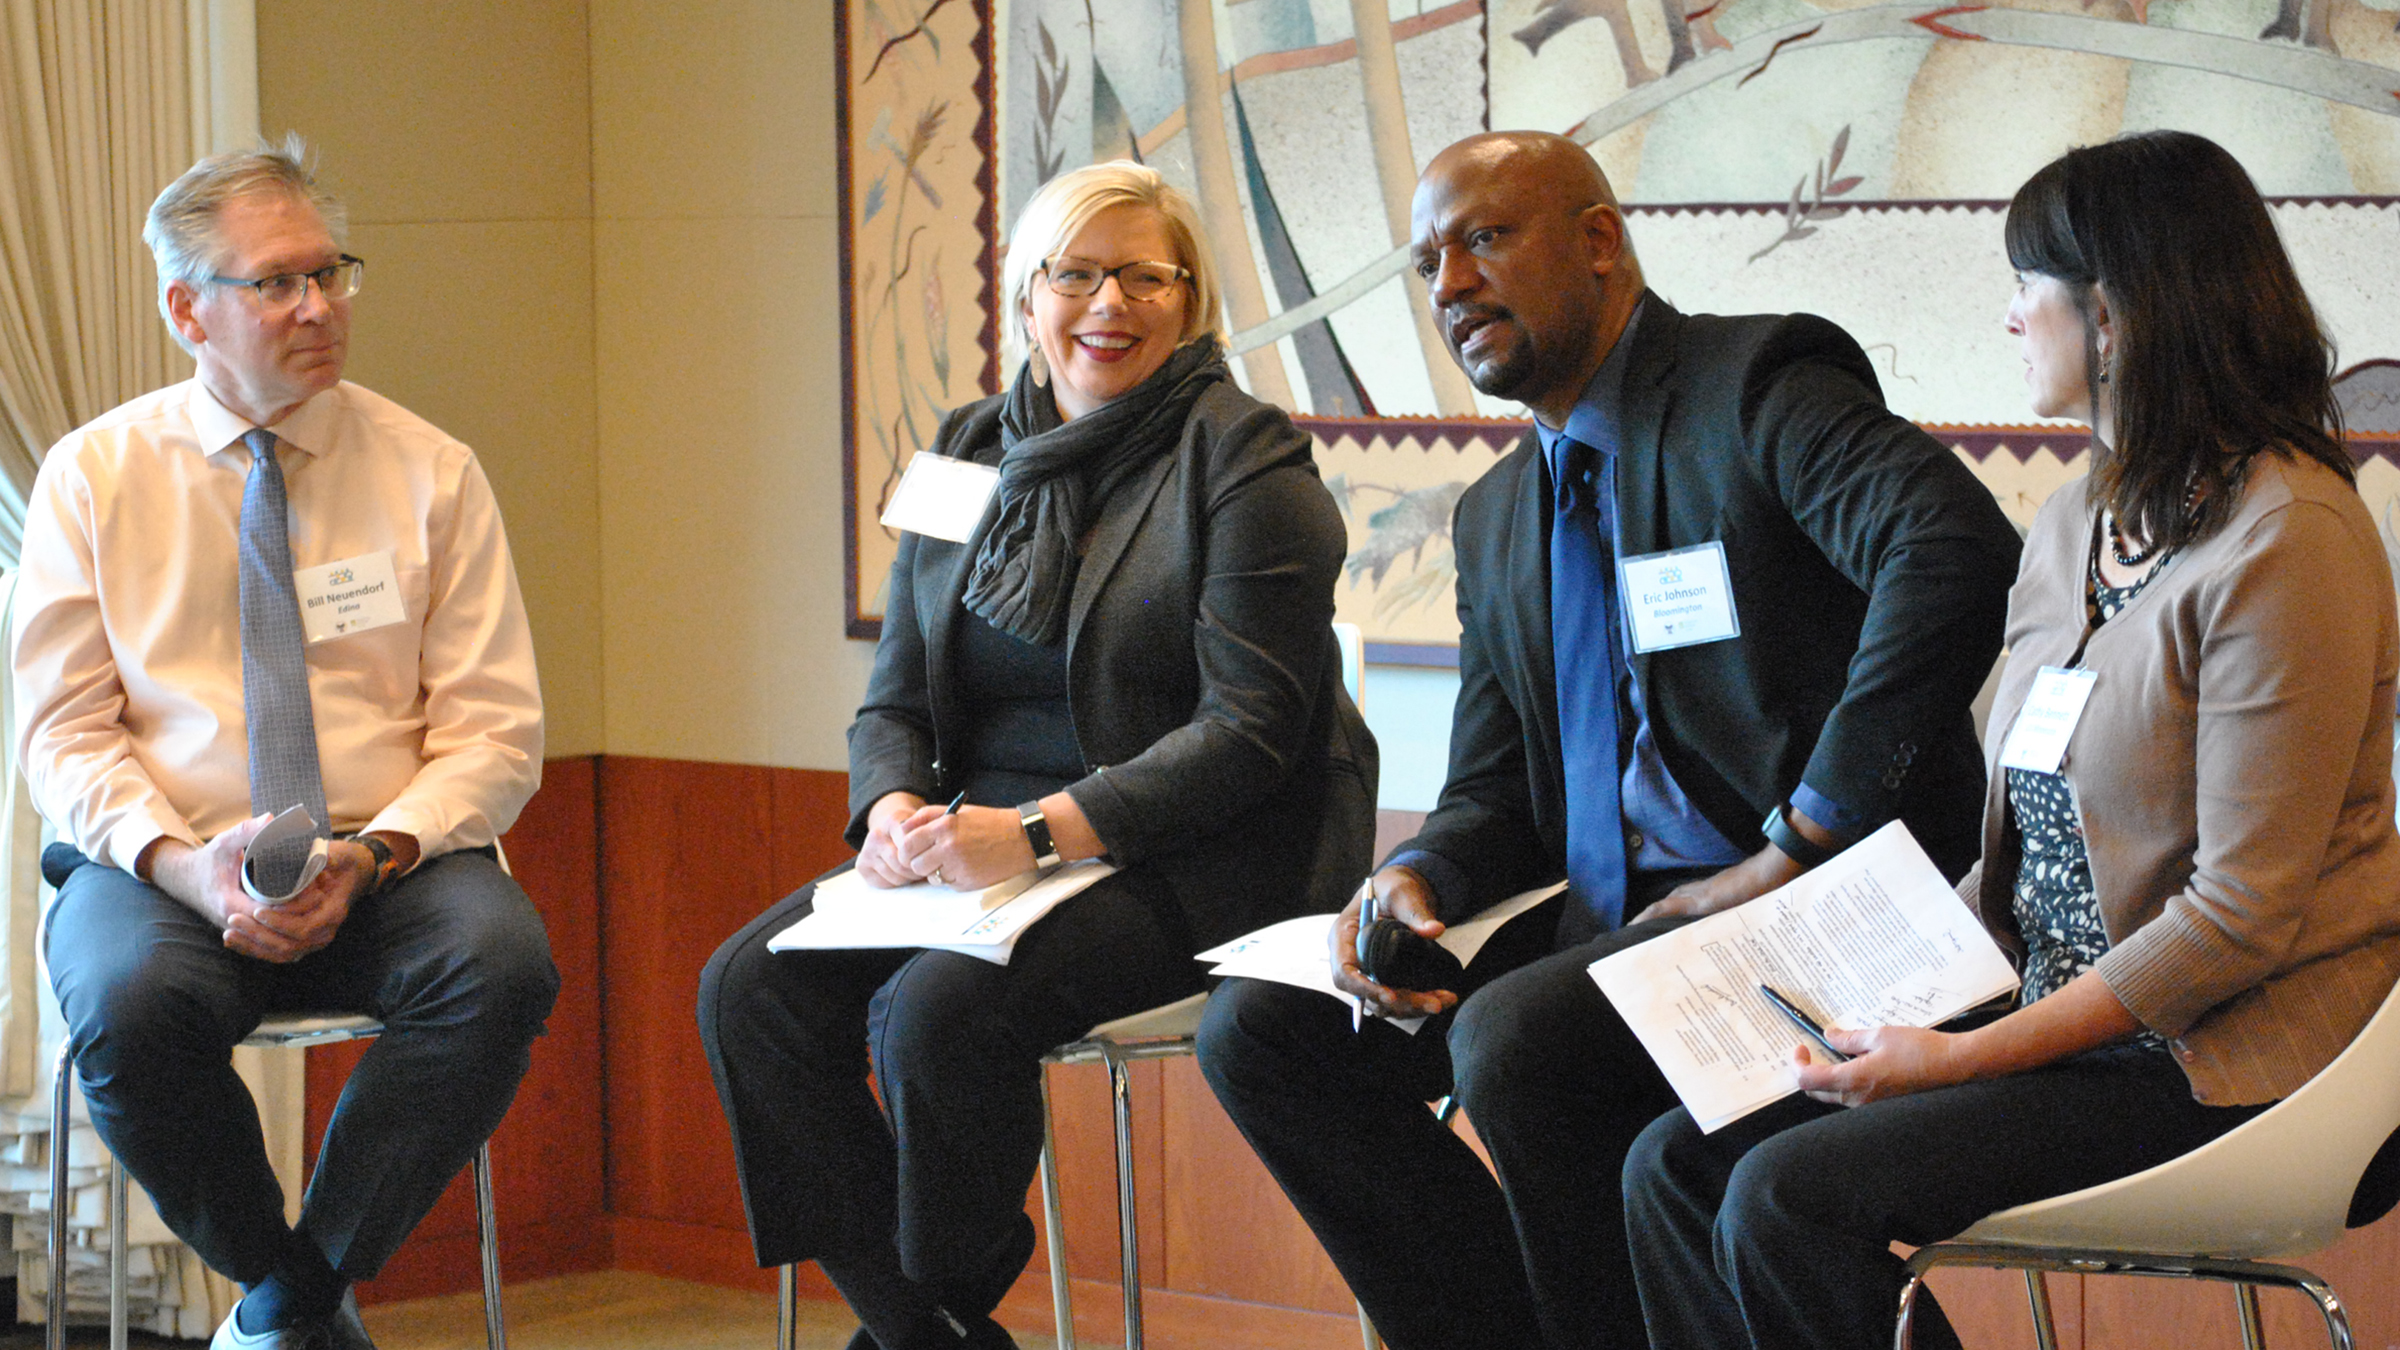 Panelists take questions at the October 30, 2019, peer learning exchange on mixed-income housing policies. From left to right: Bill Neuendorf, City of Edina; Julie Wischnack, City of Minnetonka; Eric Johnson, City of Bloomington; and moderator Cathy Capone Bennett, Urban Land Institute Minnesota.